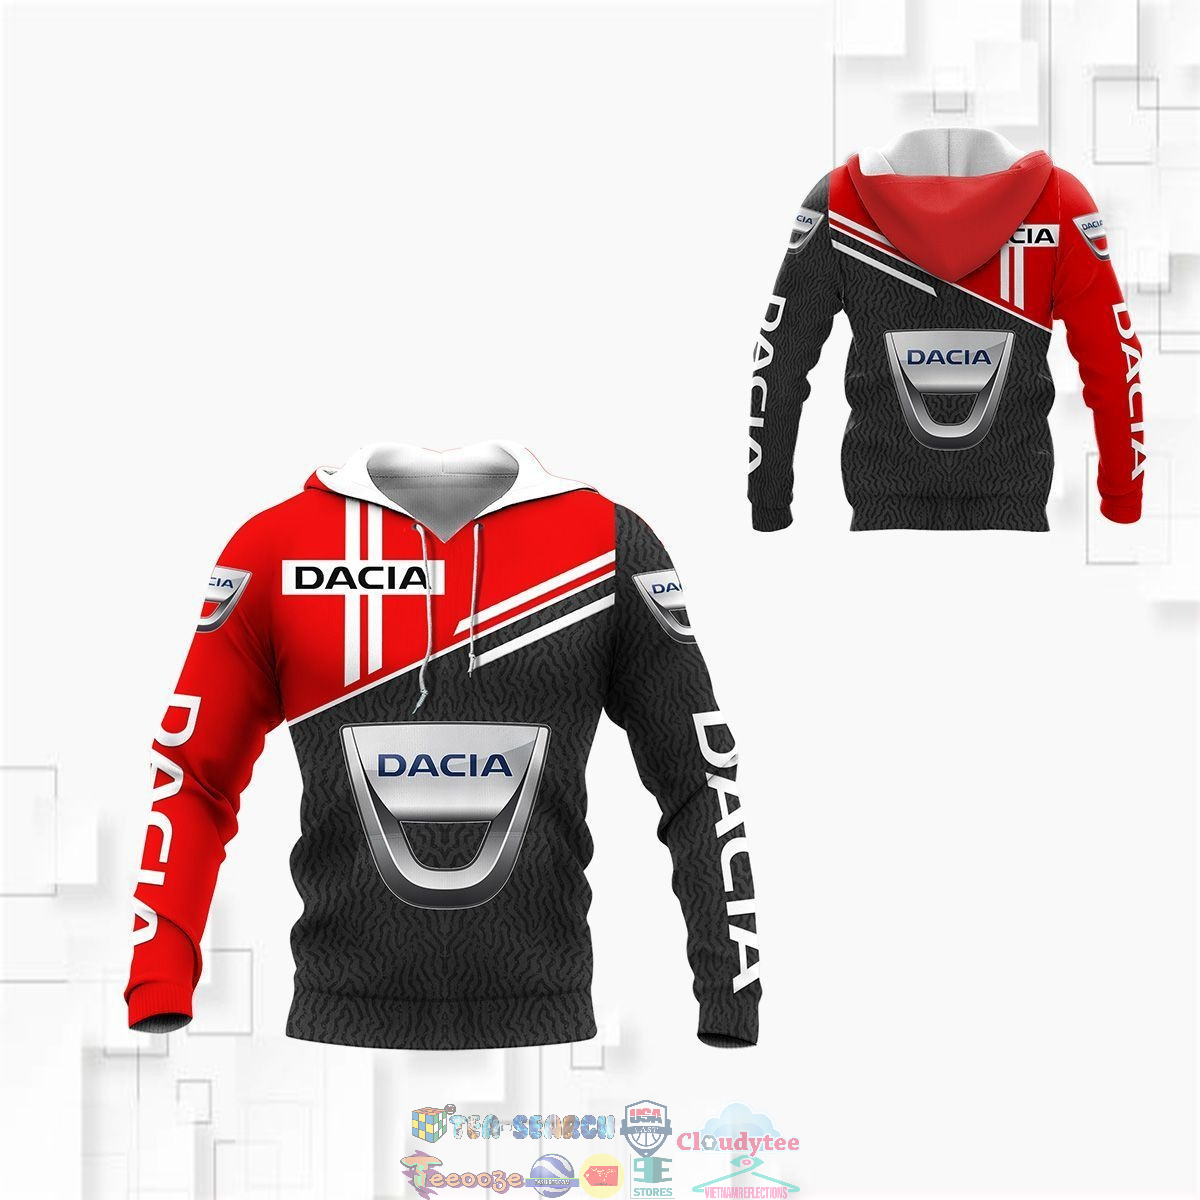 Automobile Dacia ver 5 3D hoodie and t-shirt